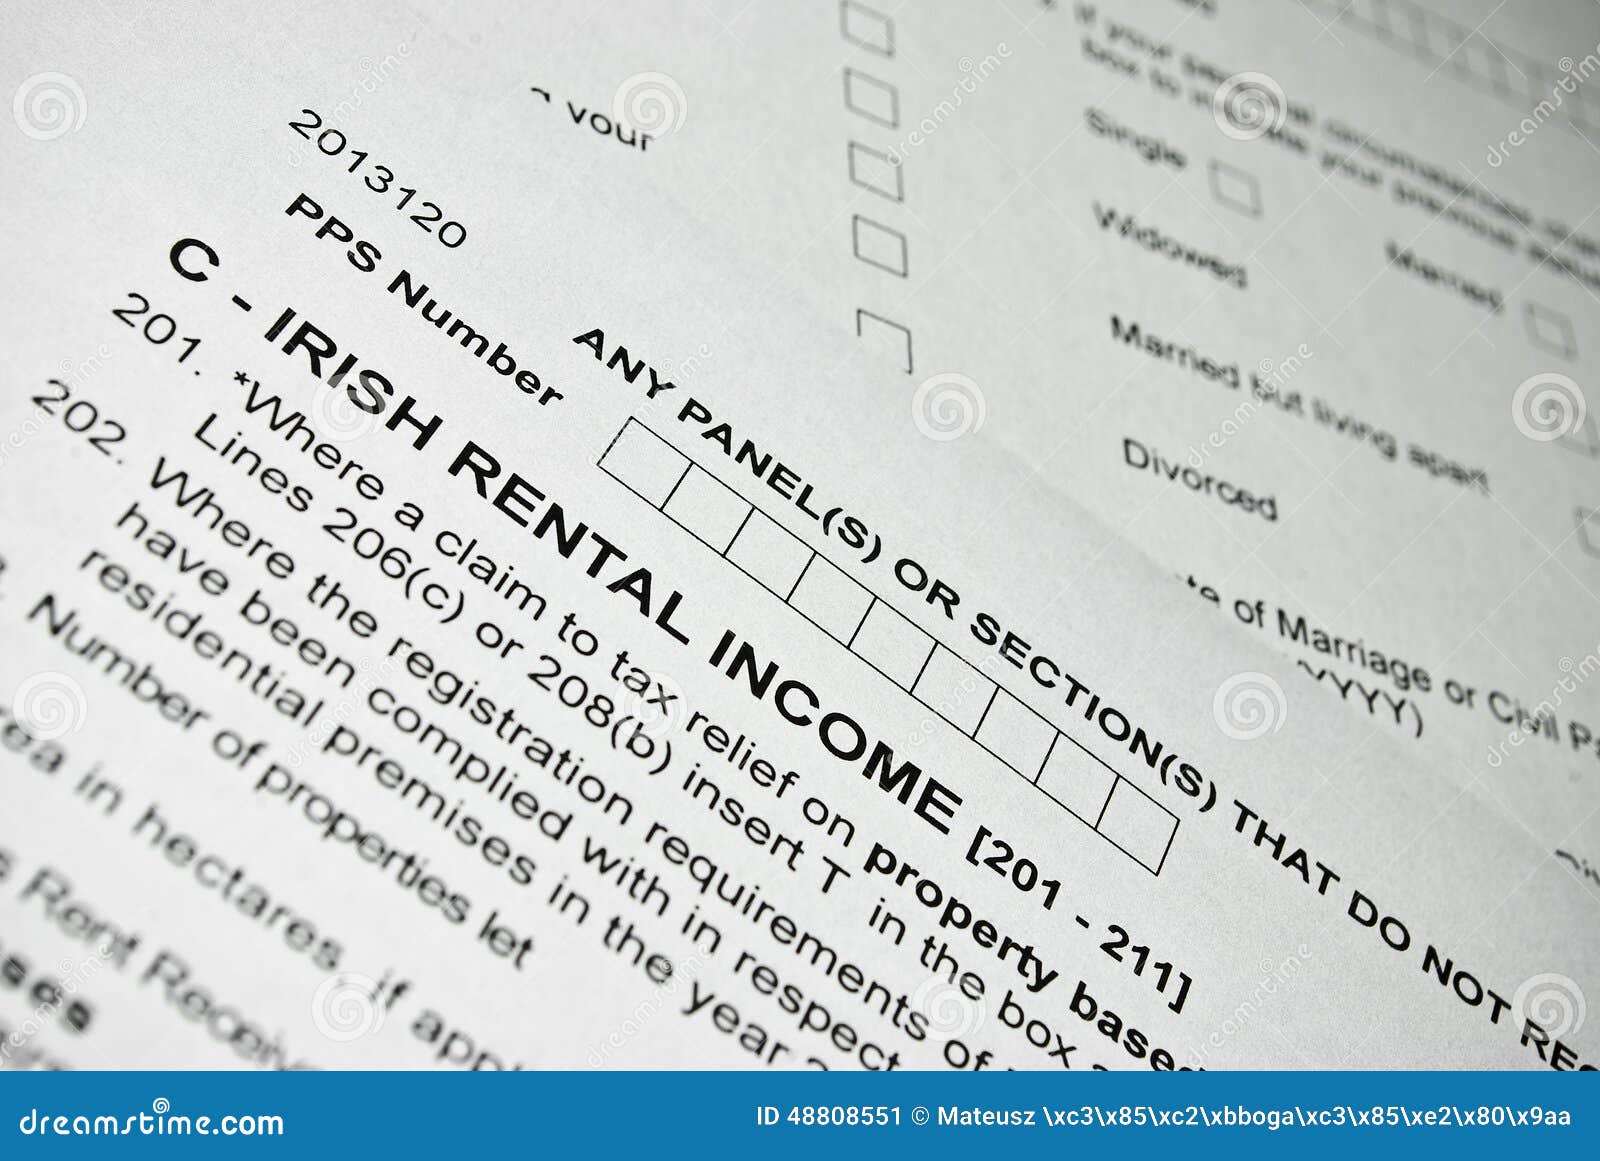 irish-tax-form-personal-income-tax-form-royalty-free-stock-photo